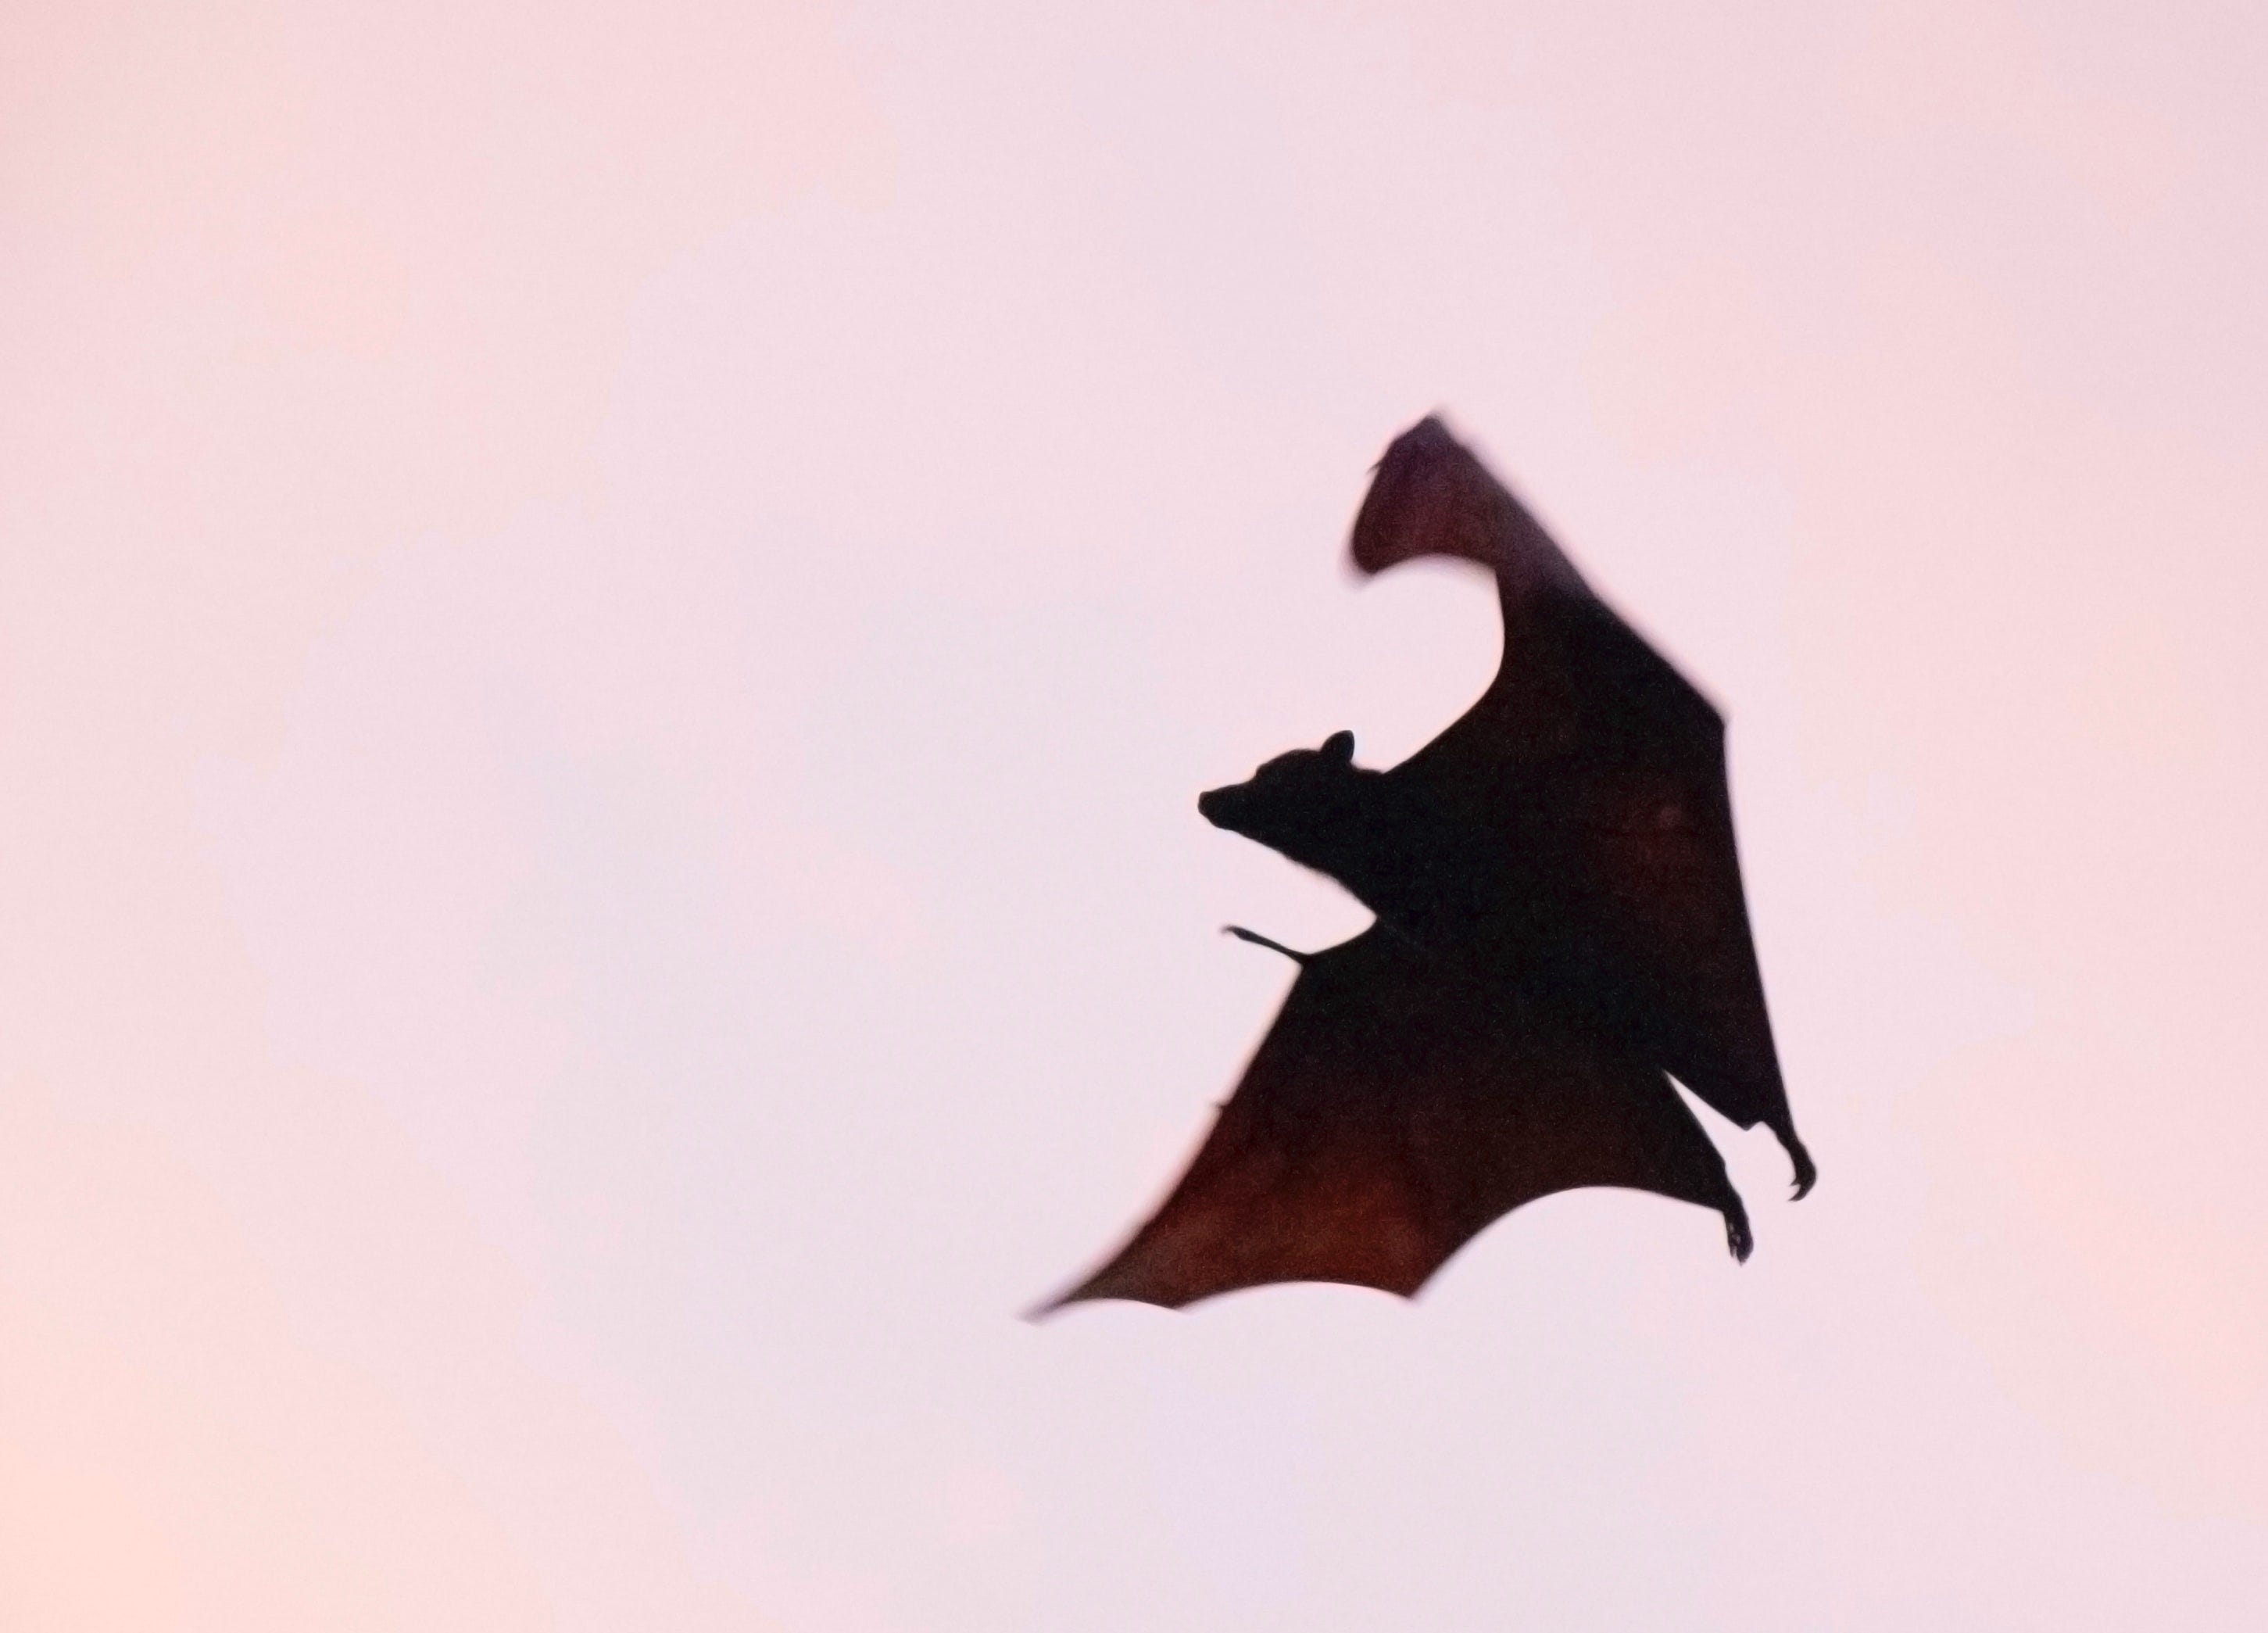 How to get rid of bats in a house naturally: 8 humane ways